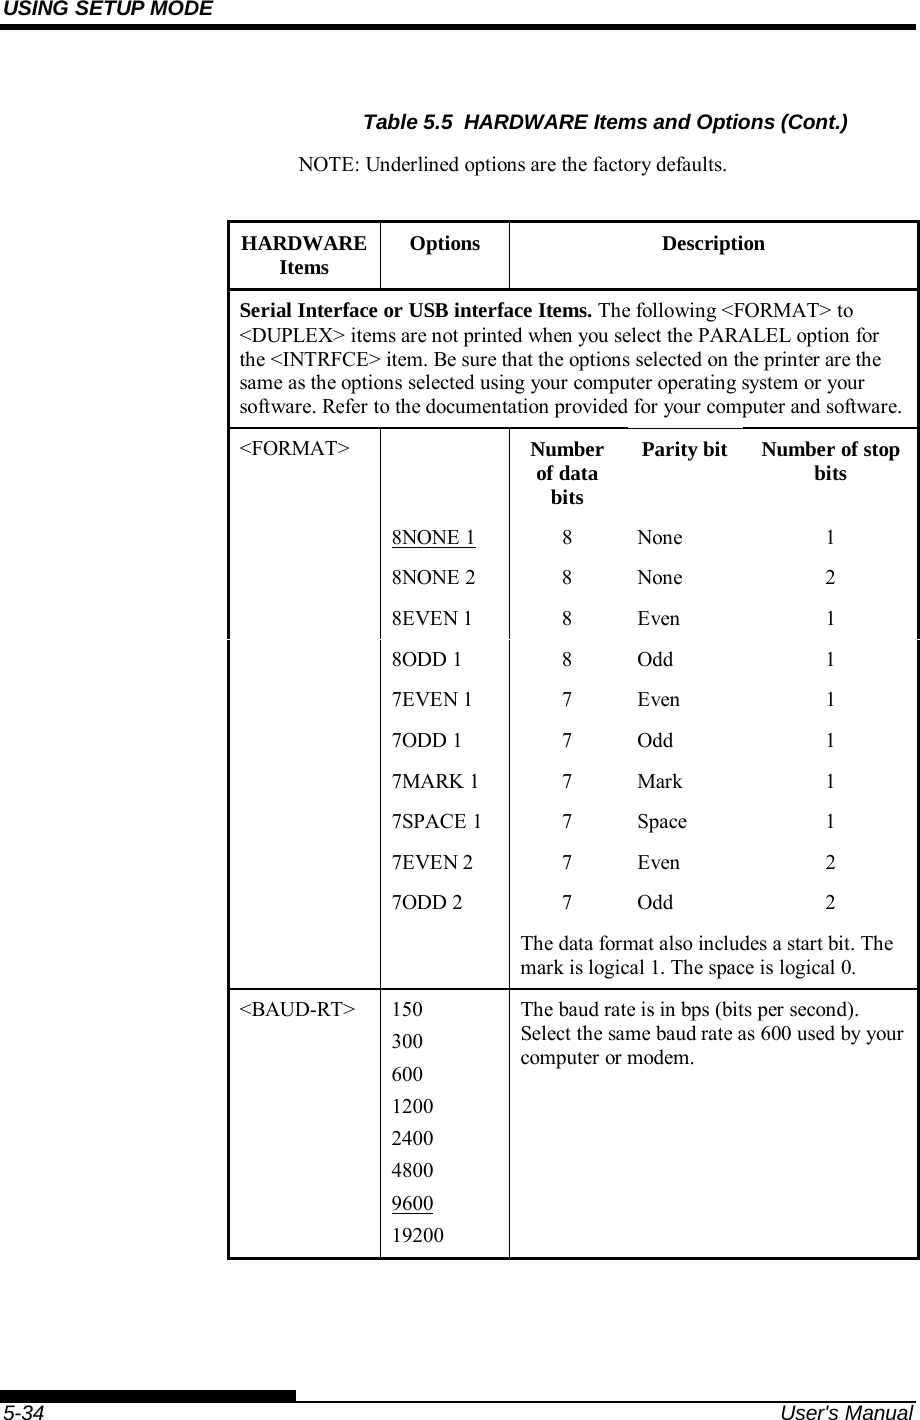 USING SETUP MODE    5-34  User&apos;s Manual Table 5.5  HARDWARE Items and Options (Cont.) NOTE: Underlined options are the factory defaults.  HARDWARE Items  Options Description Serial Interface or USB interface Items. The following &lt;FORMAT&gt; to &lt;DUPLEX&gt; items are not printed when you select the PARALEL option for the &lt;INTRFCE&gt; item. Be sure that the options selected on the printer are the same as the options selected using your computer operating system or your software. Refer to the documentation provided for your computer and software. &lt;FORMAT&gt;   Number of data bits Parity bit Number of stop bits  8NONE 1 8 None  1  8NONE 2 8 None 2  8EVEN 1 8 Even 1  8ODD 1 8 Odd 1  7EVEN 1 7 Even 1  7ODD 1 7 Odd 1  7MARK 1 7 Mark 1  7SPACE 1 7 Space 1  7EVEN 2 7 Even 2  7ODD 2 7 Odd 2     The data format also includes a start bit. The mark is logical 1. The space is logical 0. &lt;BAUD-RT&gt; 150 300 600 1200 2400 4800 9600 19200 The baud rate is in bps (bits per second). Select the same baud rate as 600 used by your computer or modem.  